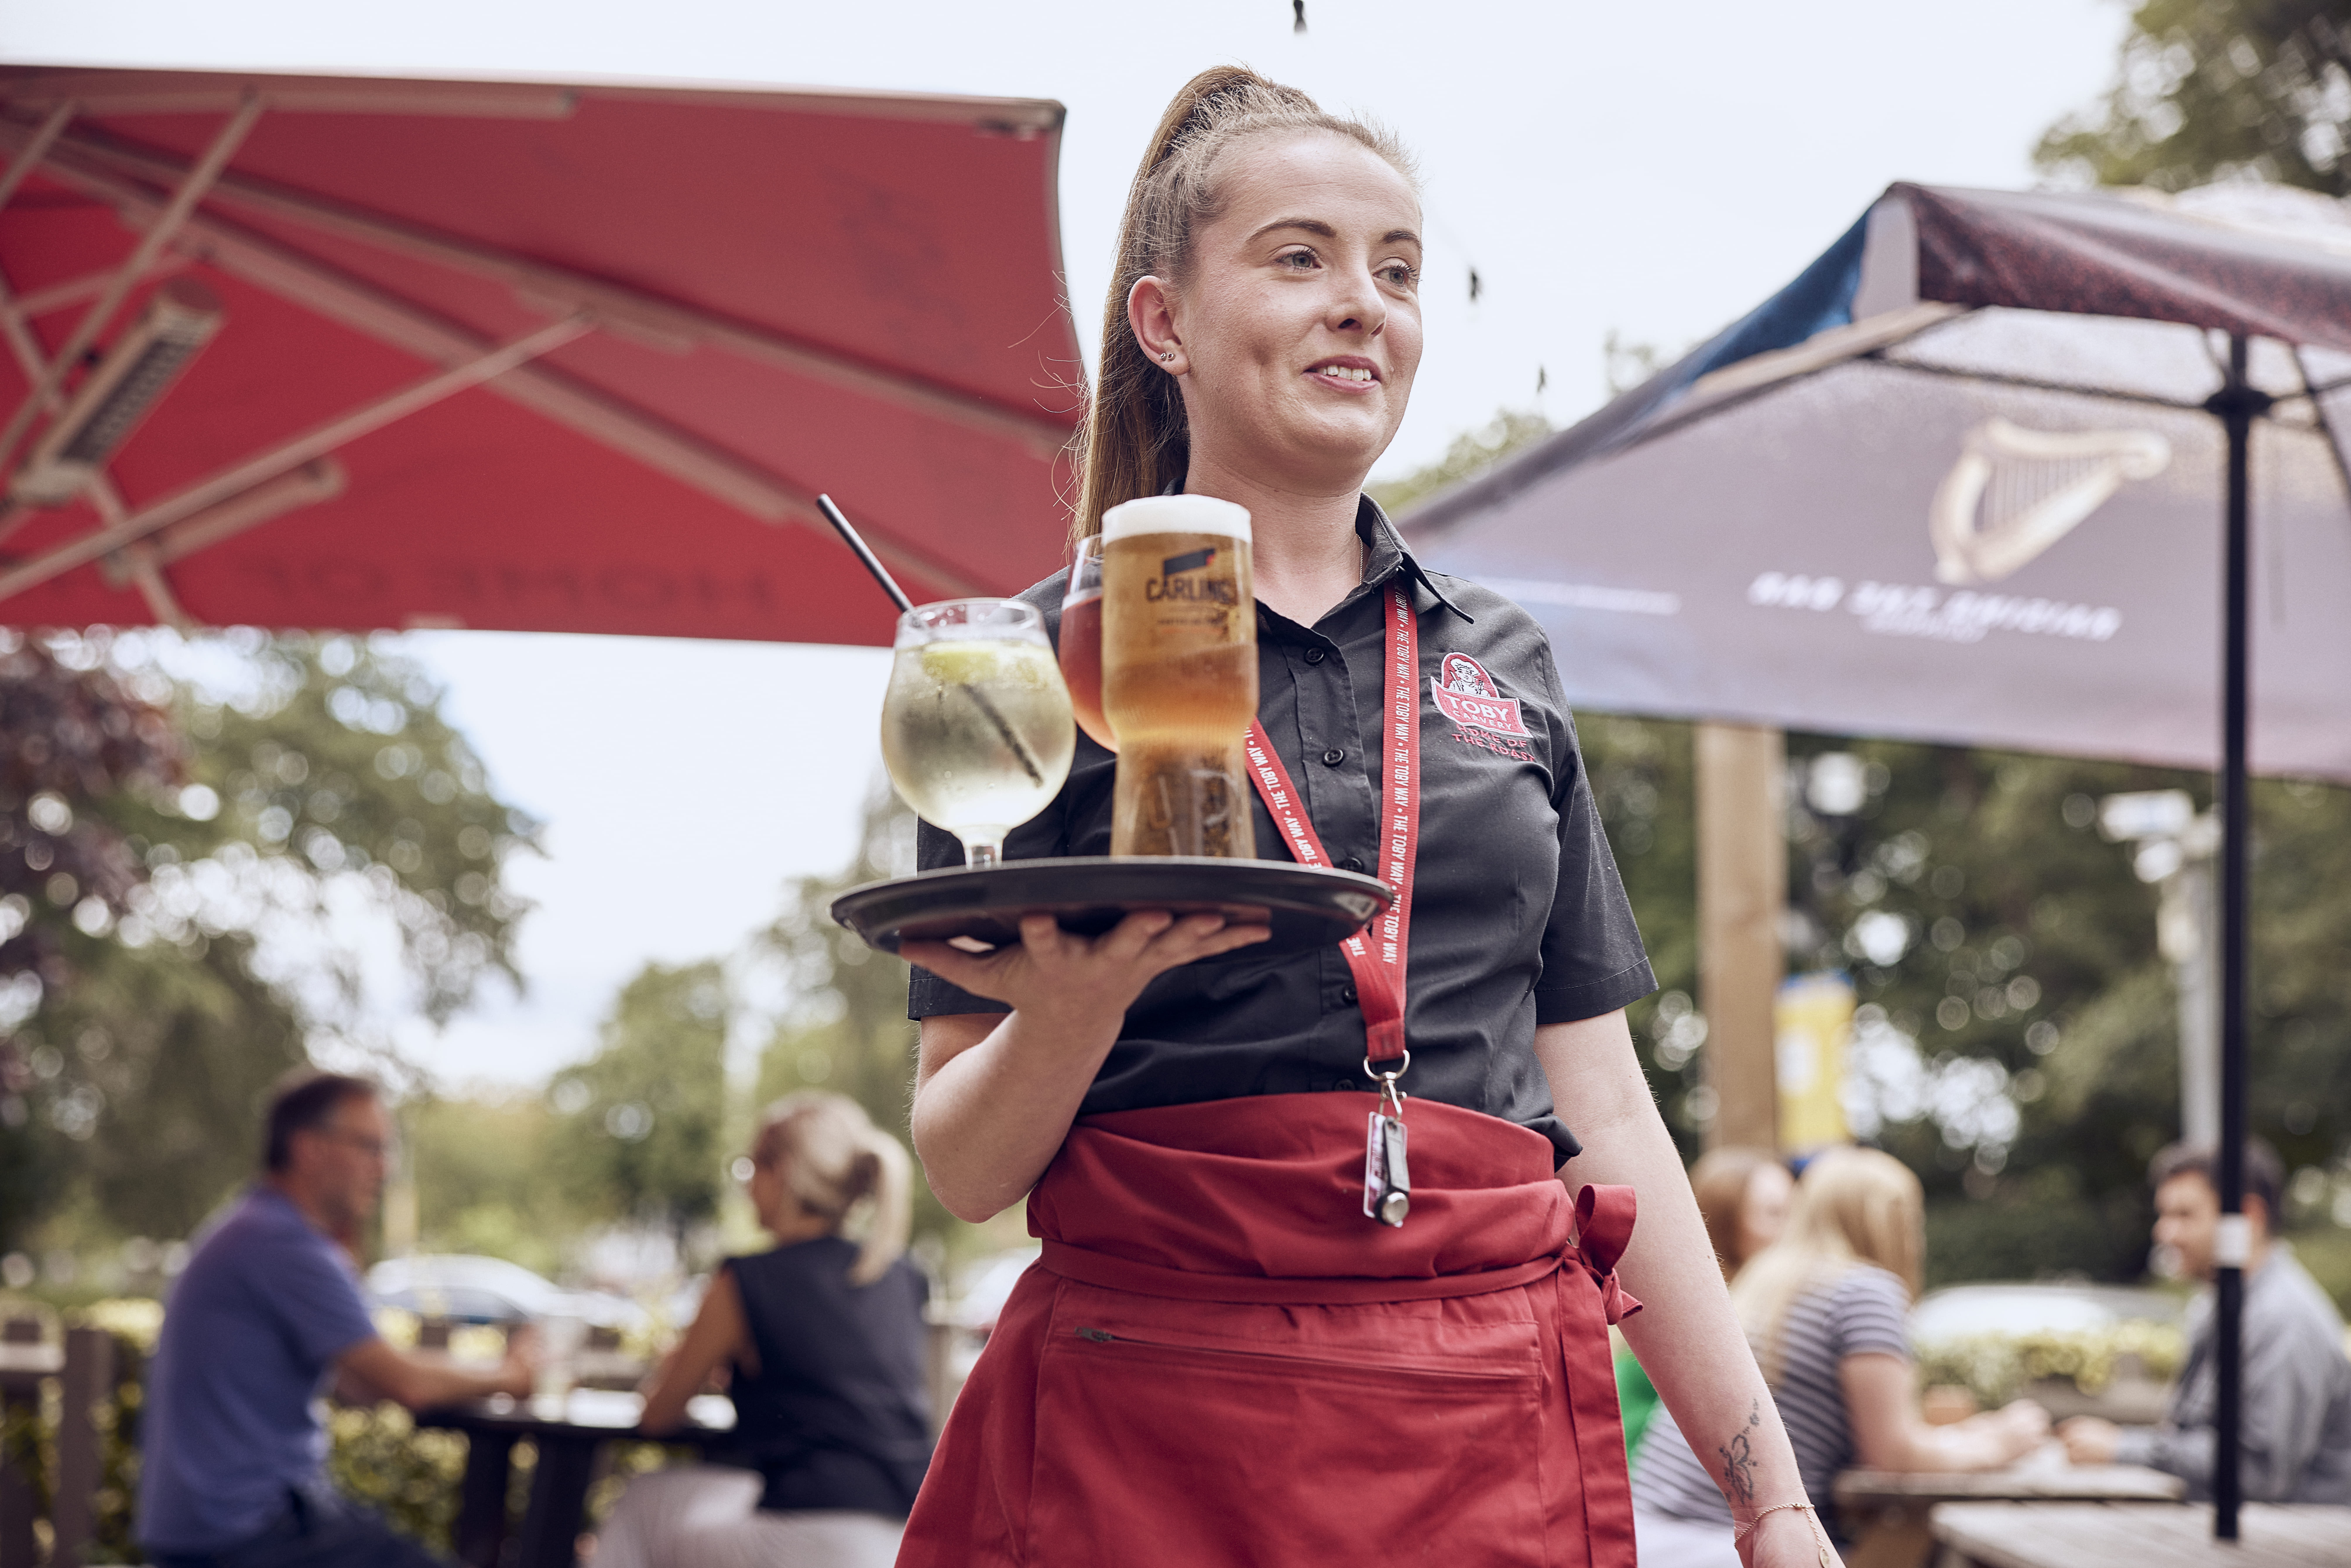 bar staff smiling holding a tray with drinks in summer beer garden 